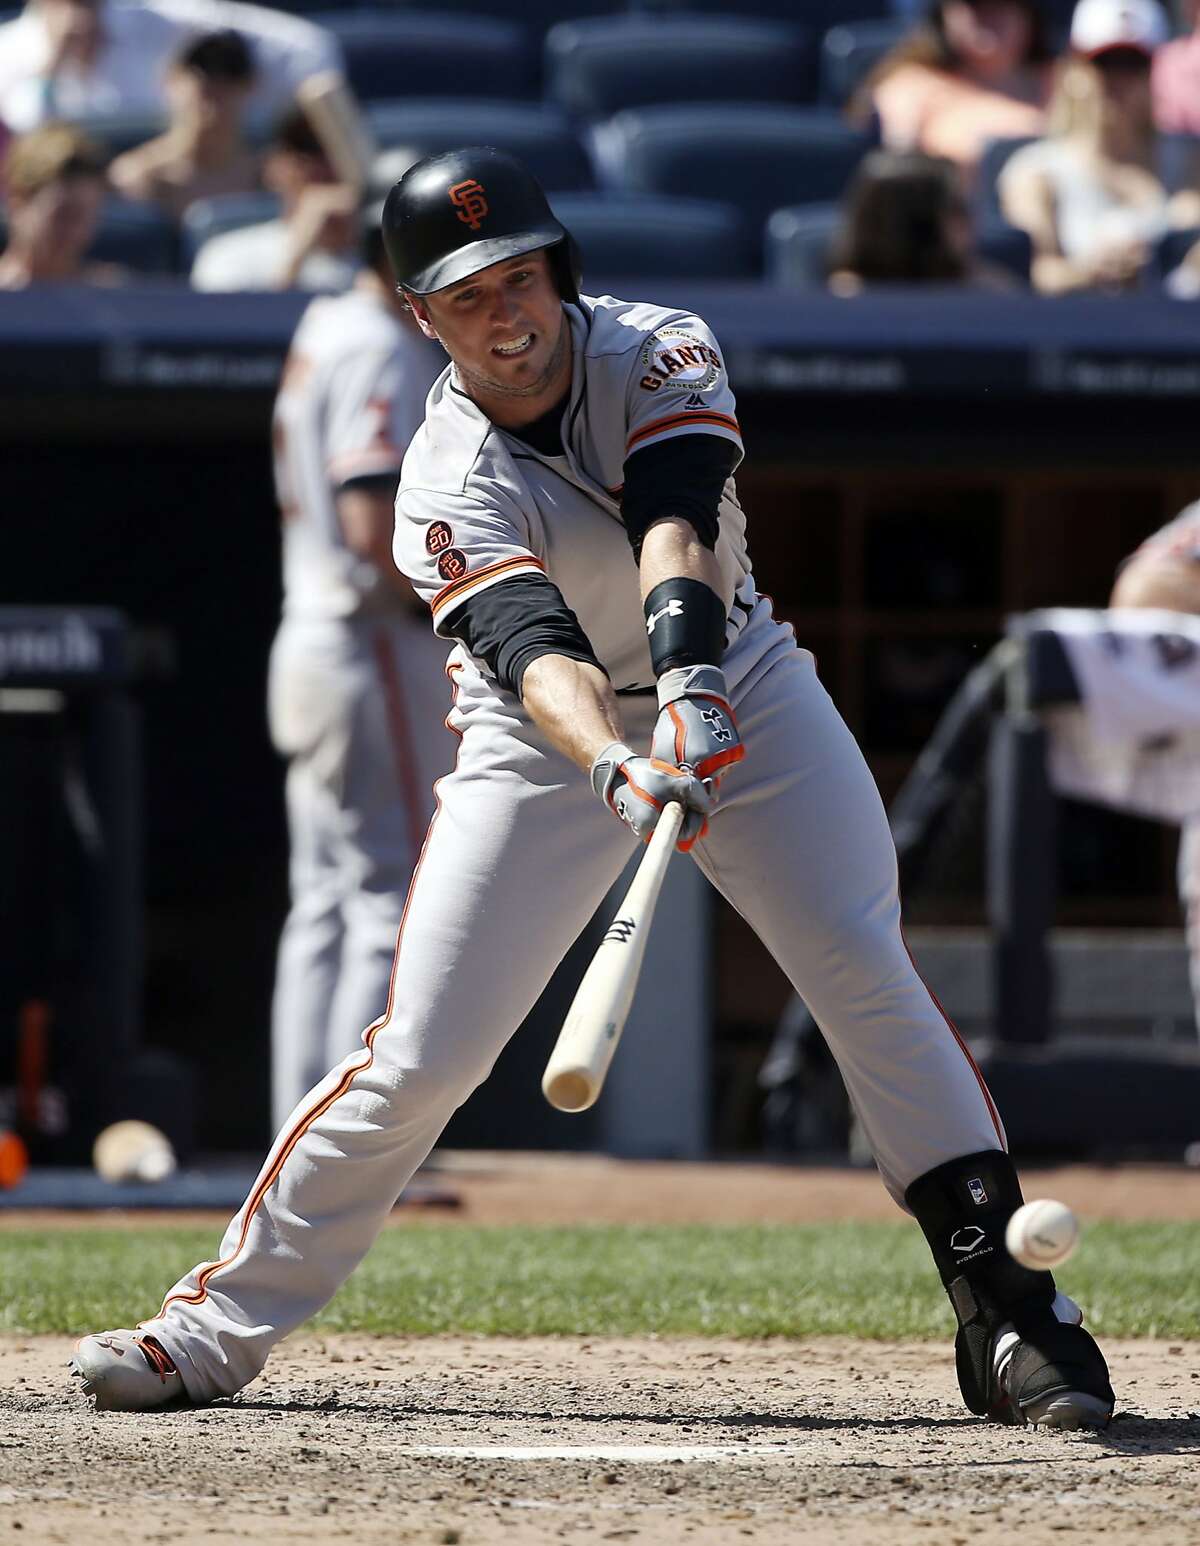 San Francisco Giants' Buster Posey hits a two-run single during the seventh inning of a baseball game against the New York Yankees at Yankee Stadium, Sunday, July 24, 2016, in New York. (AP Photo/Seth Wenig)